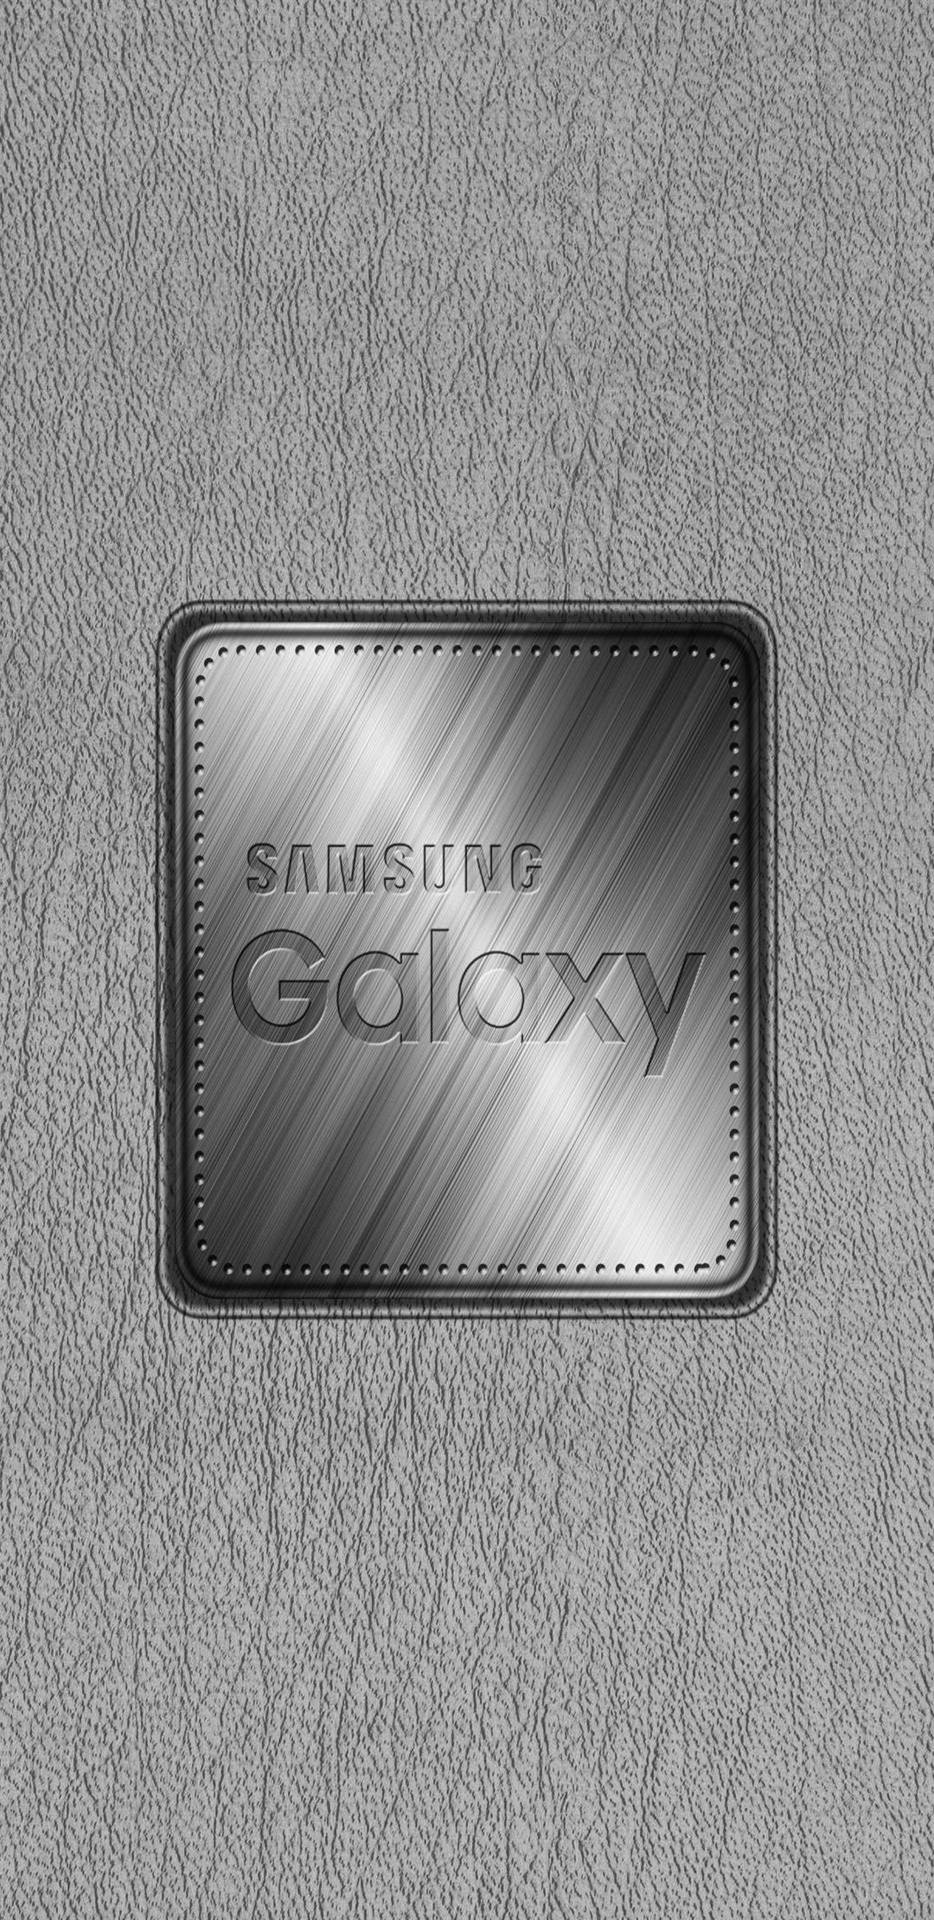 Samsung Galaxy Silver Leather Texture